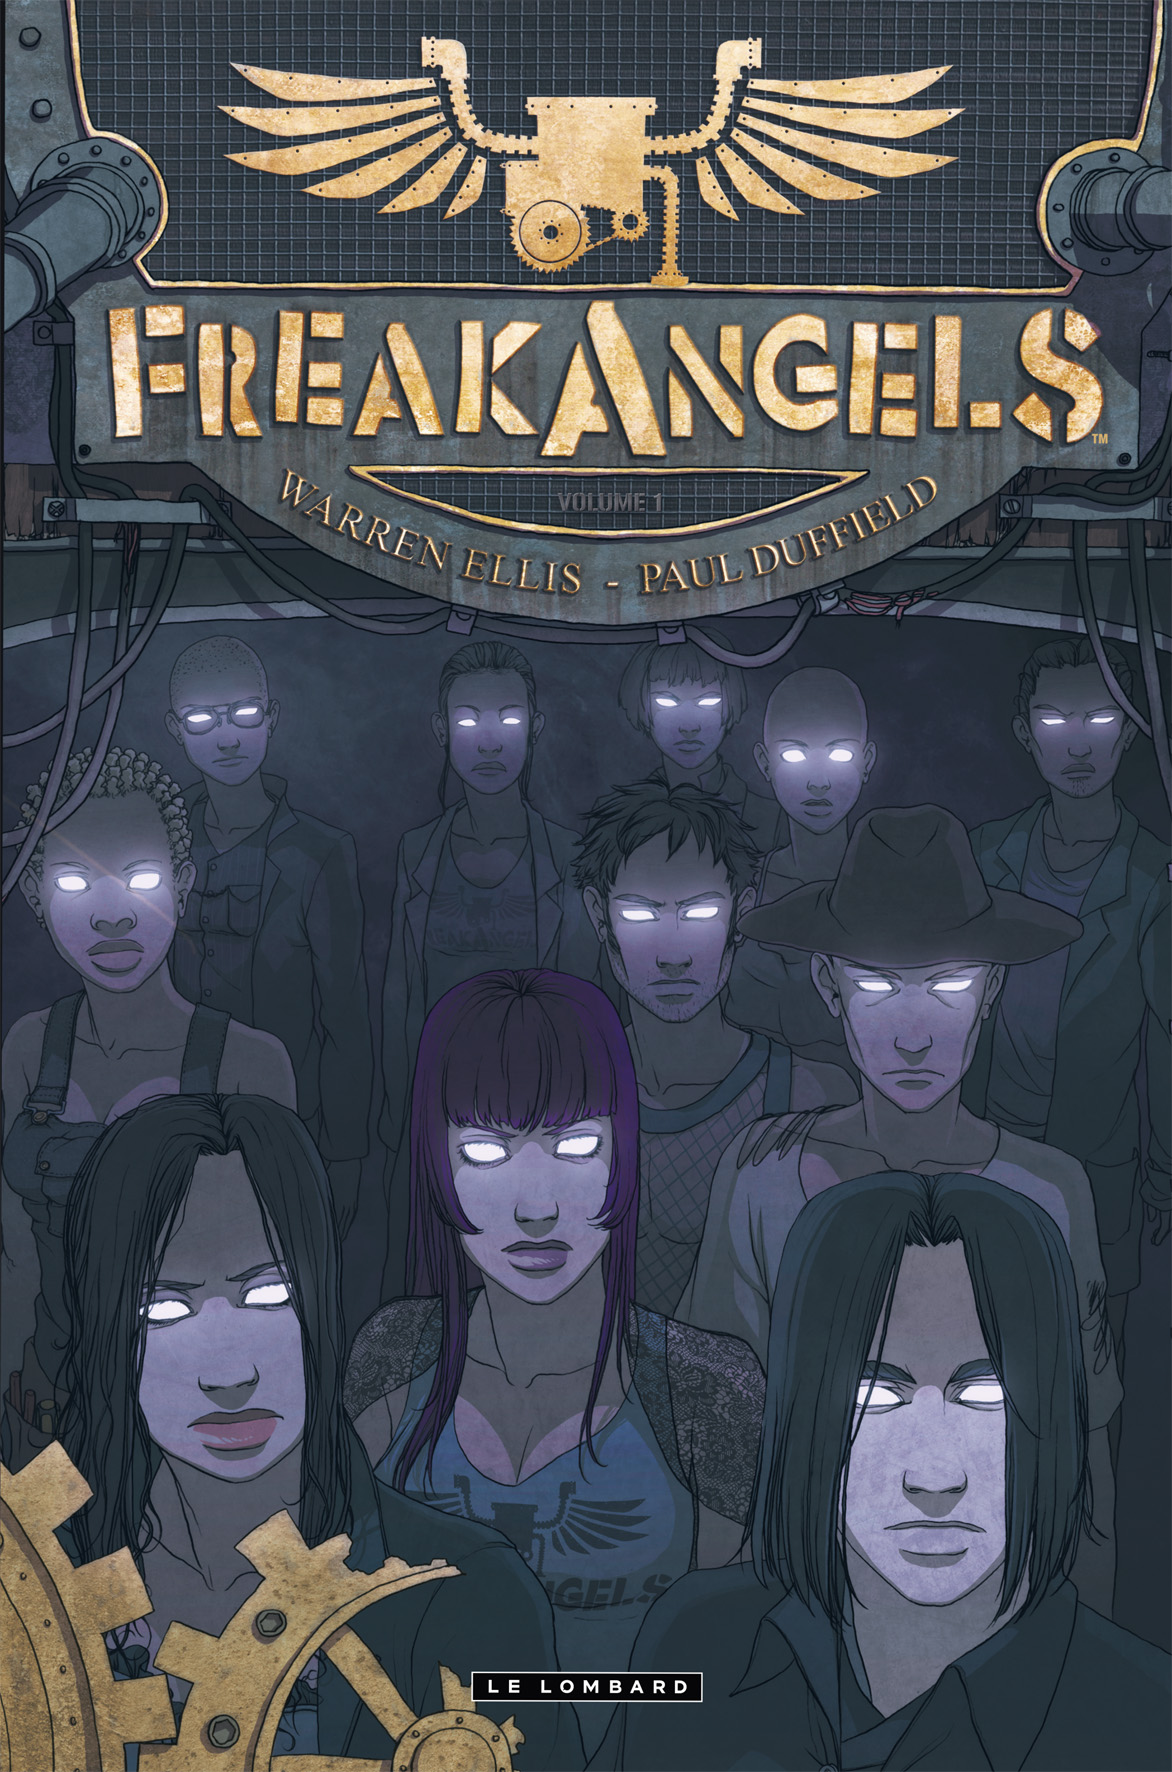 Freakangels – Tome 1 - couv